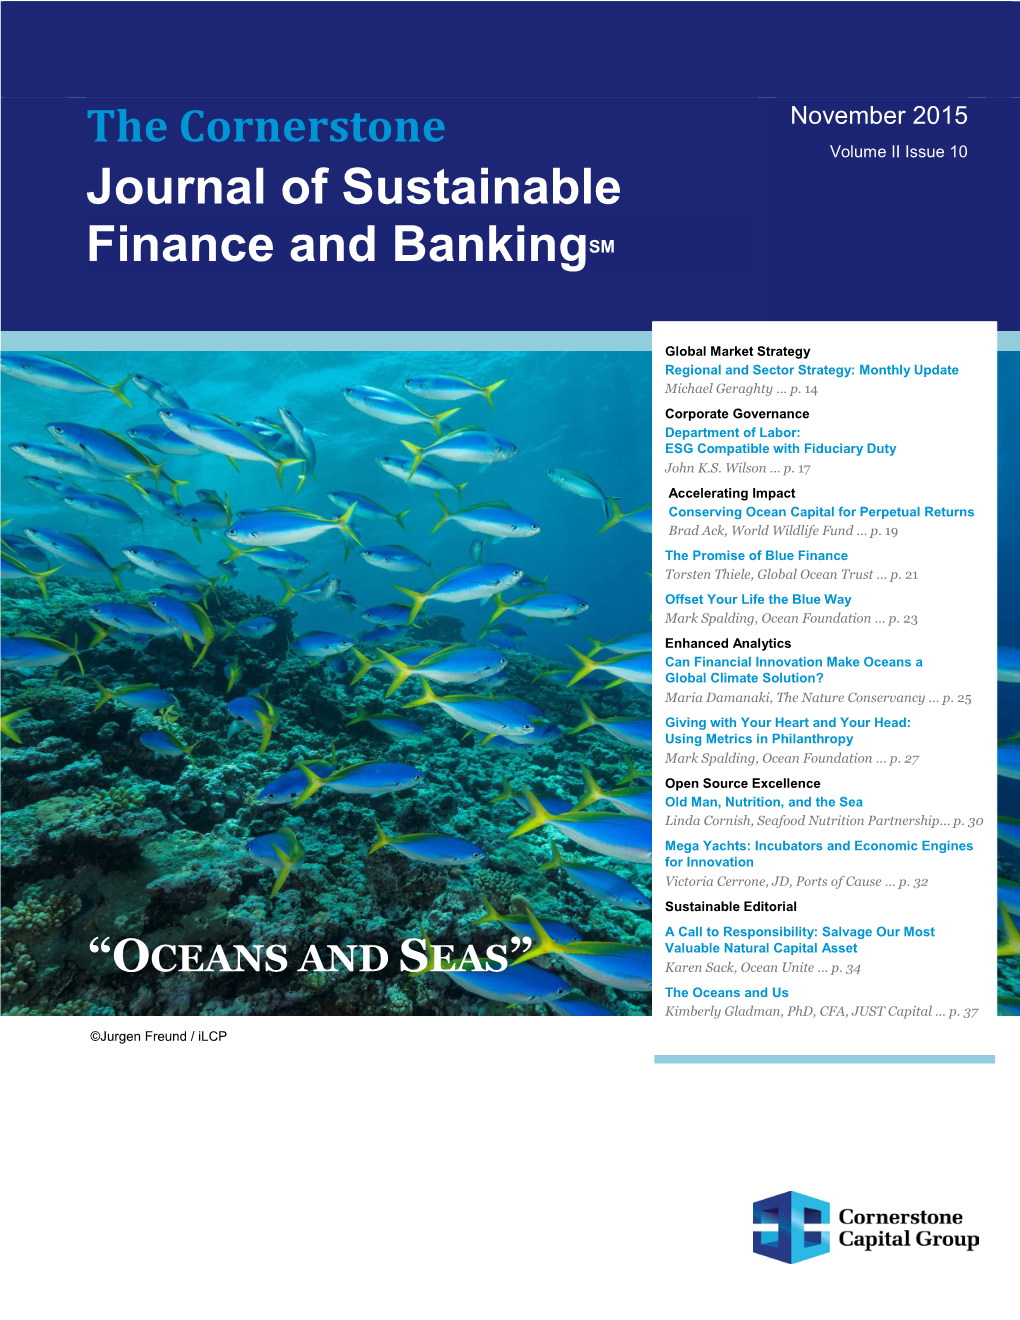 Journal of Sustainable Finance and Bankingsm